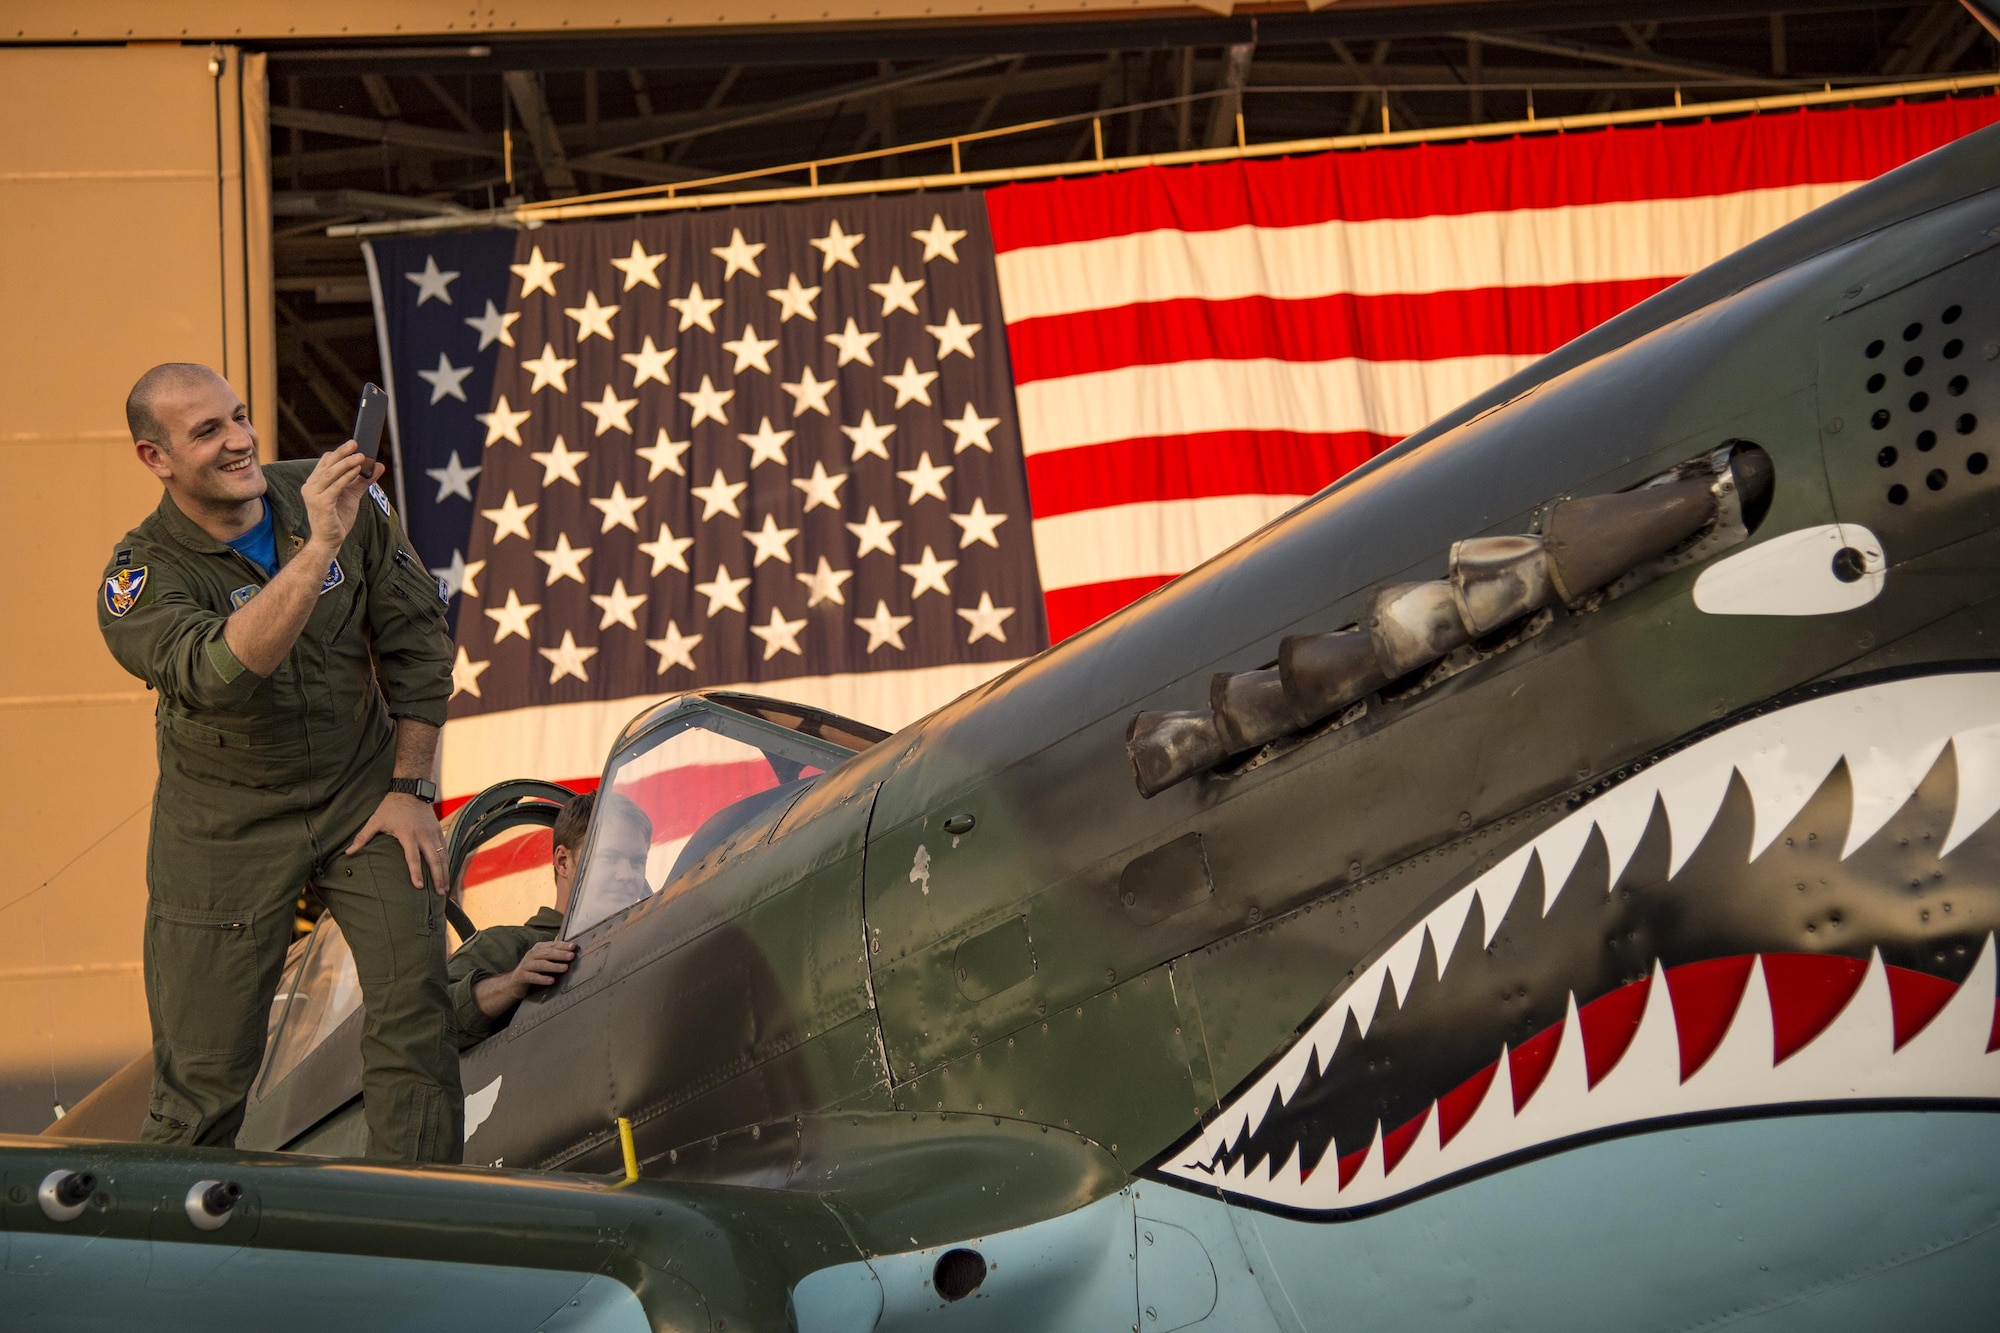 Capt. Roberto Manzo, 74th Fighter Squadron Italian Air Force exchange pilot, takes a photo of the Curtiss P-40 Warhawk static display during the 75th Anniversary Flying Tiger Reunion, March 10, 2017, at Moody Air Force Base, Ga. In 1941, President Roosevelt signed an executive order forming the American Volunteer Group. The AVG was organized into the 1st, 2nd, and 3rd Pursuit Squadrons and later disbanded and replaced by the 23d Fighter Group in 1942. Under the command of Gen. Claire Chennault, the Flying Tigers comprised of the 74th, 75th, and 76th Pursuit Squadrons defended China against the Japanese. Throughout World War II, the Flying Tigers achieved combat success and flew the US-made Curtiss P-40 Warhawks painted with the shark-mouth design. (U.S. Air Force photo by Andrea Jenkins)